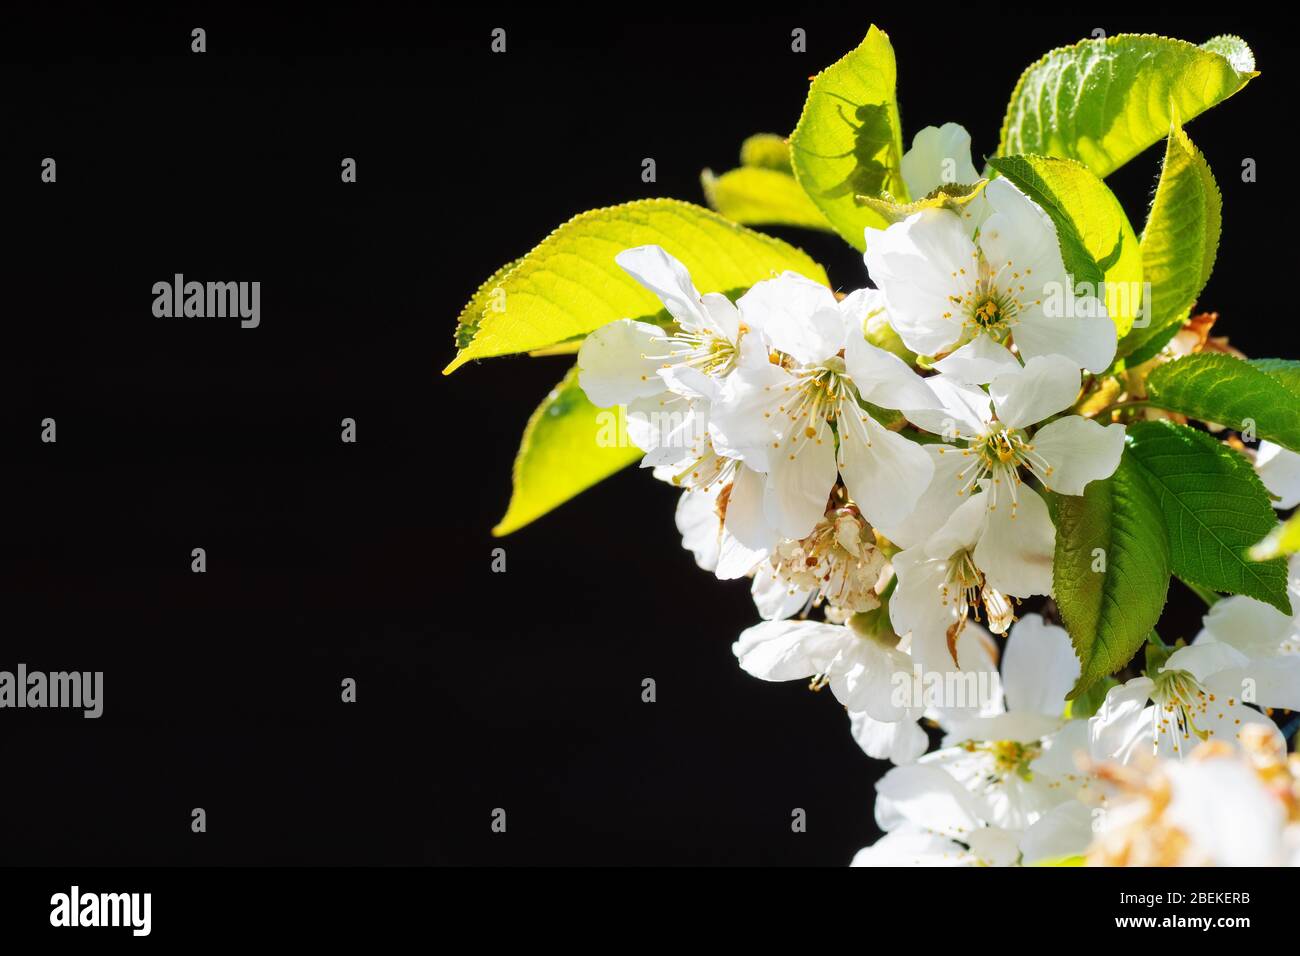 Sunlit white cherry blossoms on black background. Botany, flowers, seasons and agriculture concepts Stock Photo